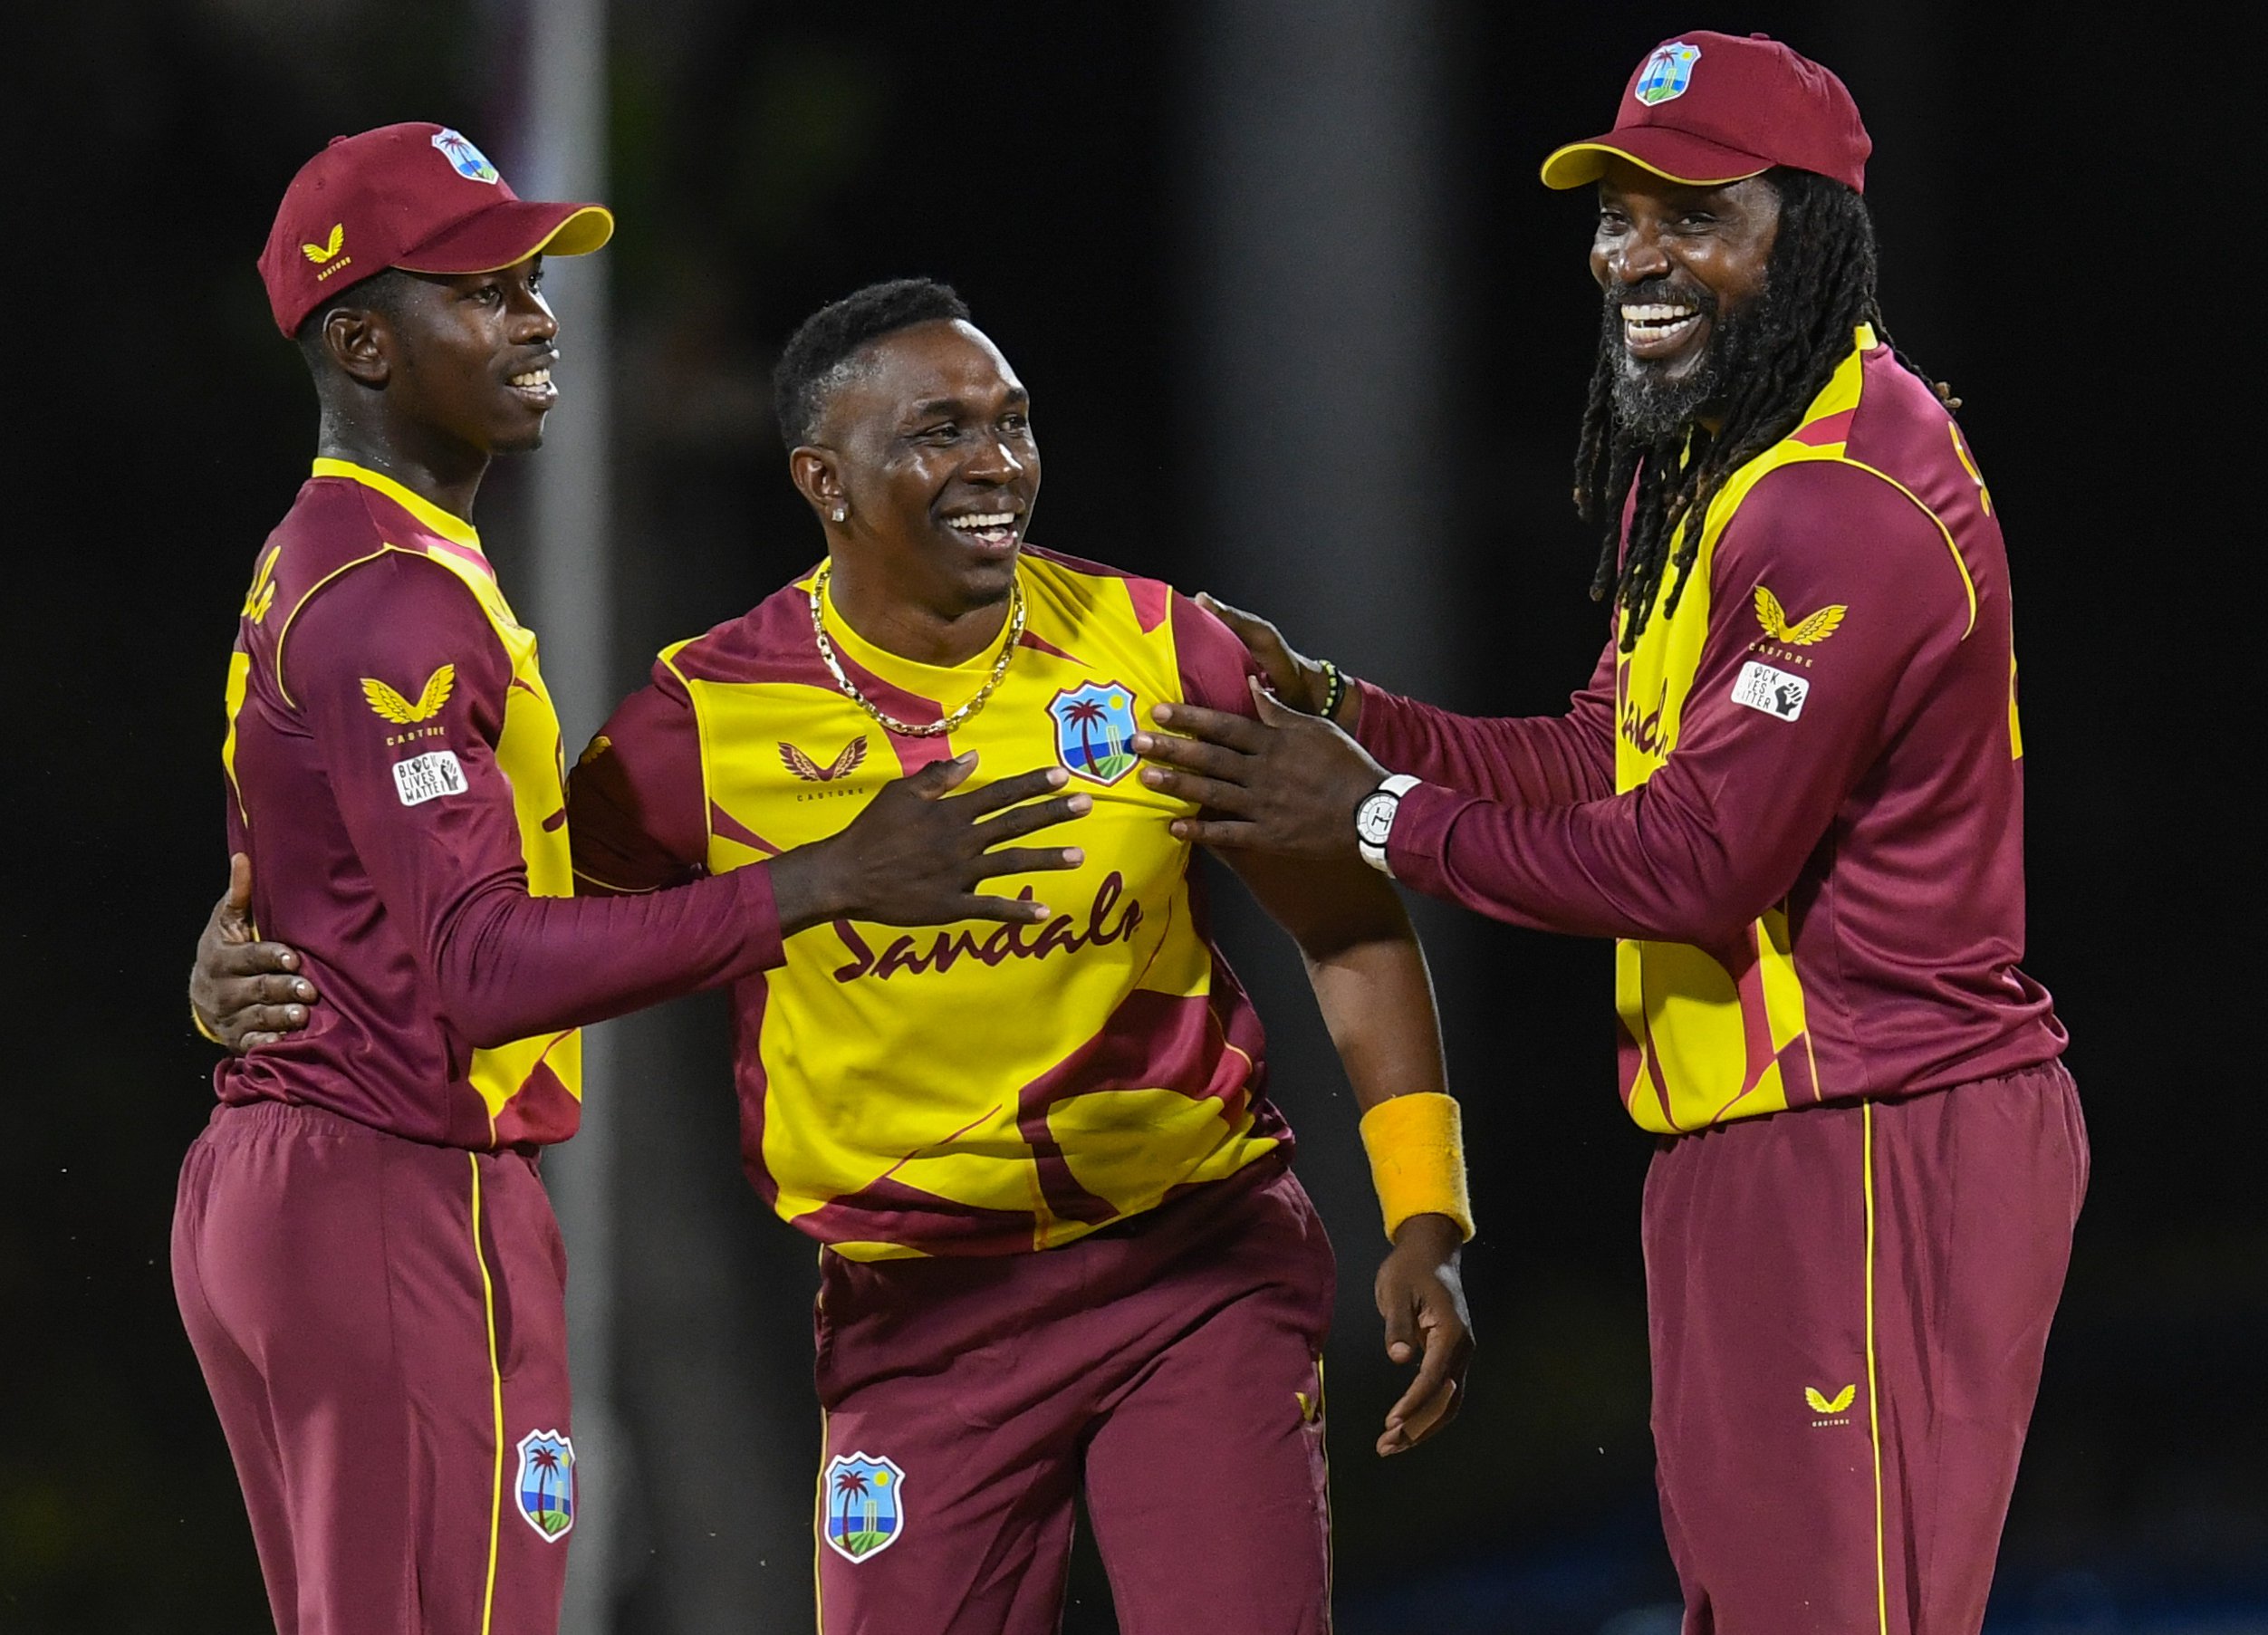 AUS vs WI Live Streaming Details- When And Where To Watch Australia vs West Indies Live In Your Country? ICC T20 World Cup 2021 Match 38